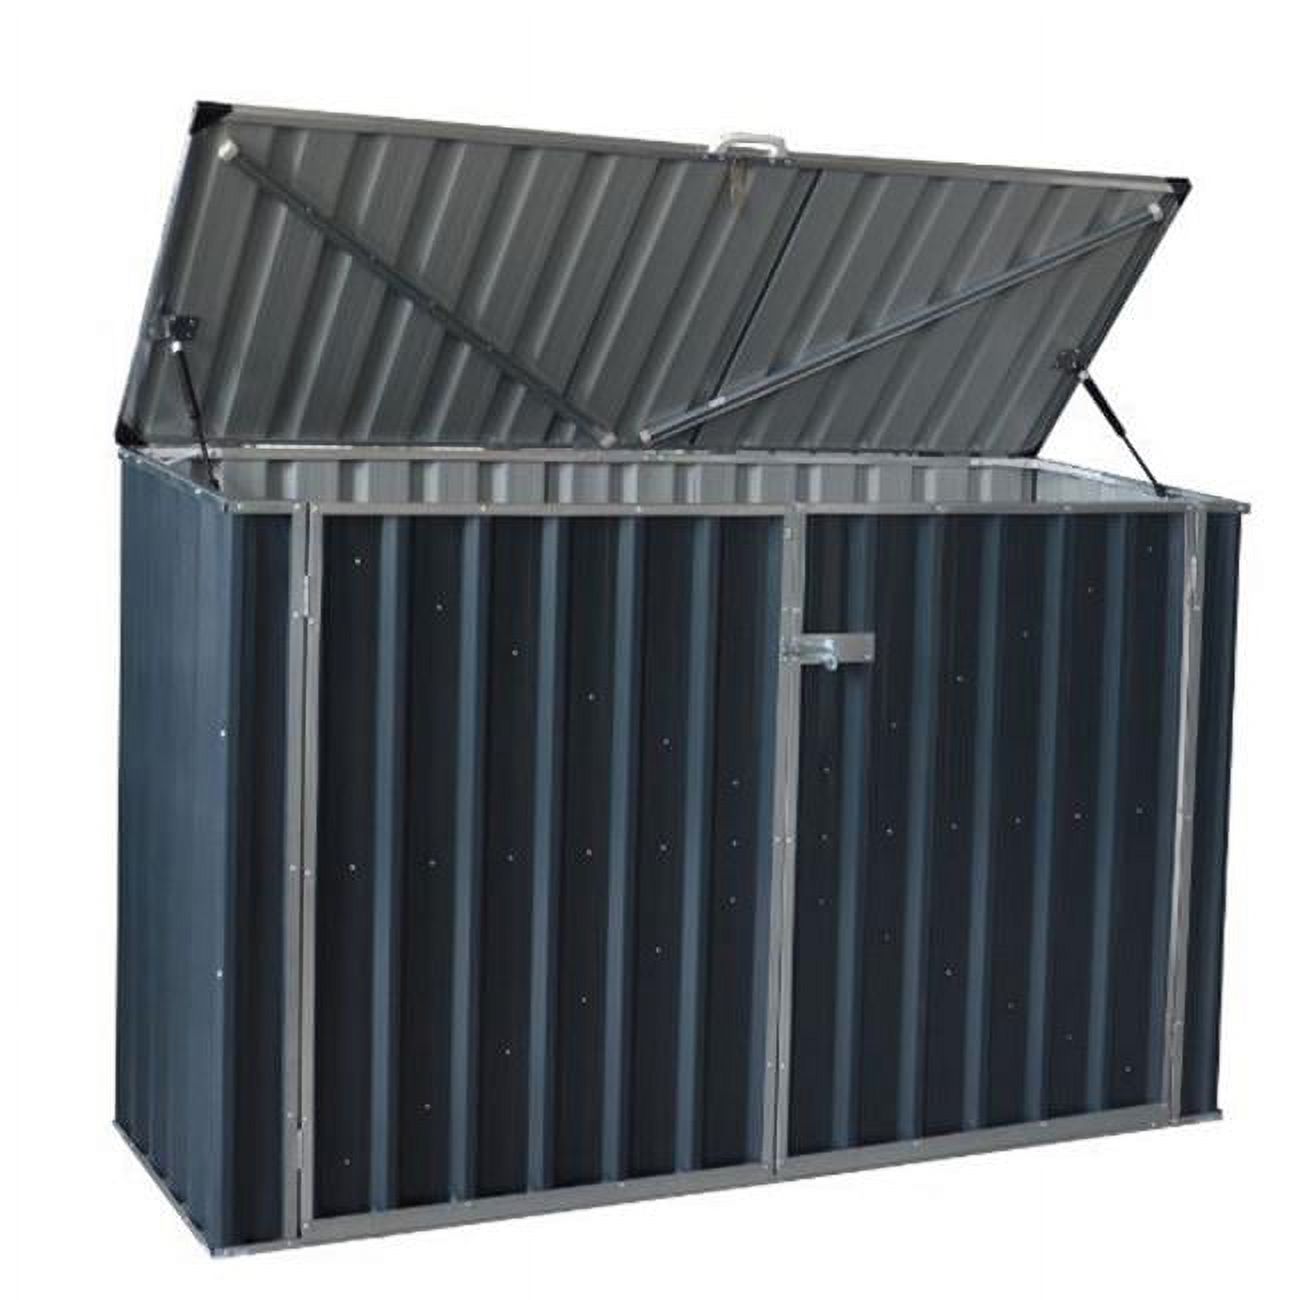 Build-Well 7694235 6 x 3 ft. Metal Horizontal Storage Shed without Floor Kit - image 1 of 3